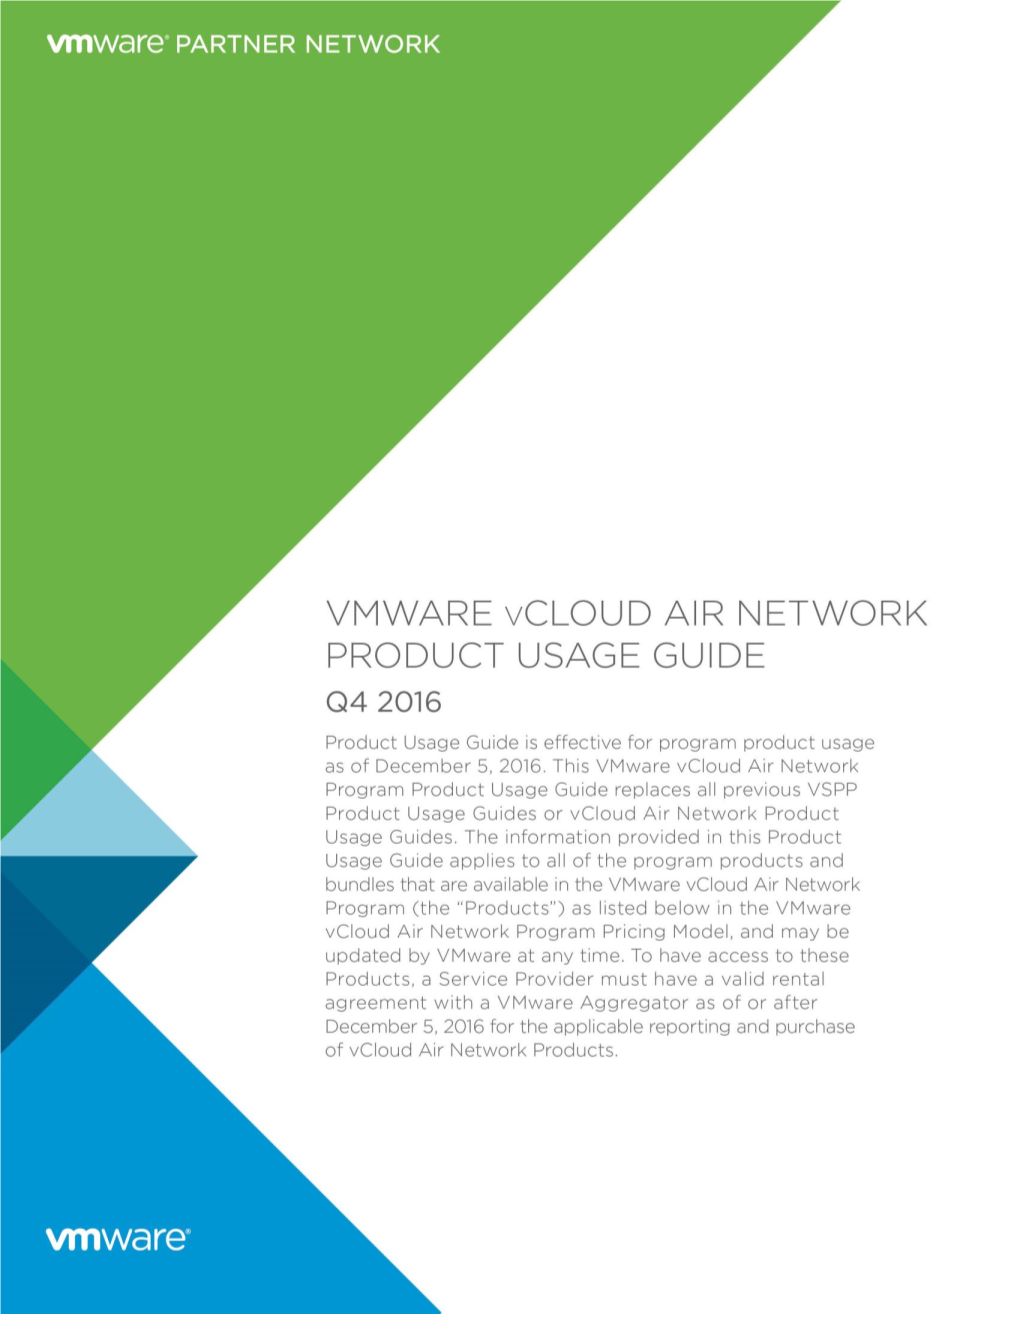 Vmware Vcloud Air Network Program Product Usage Guide